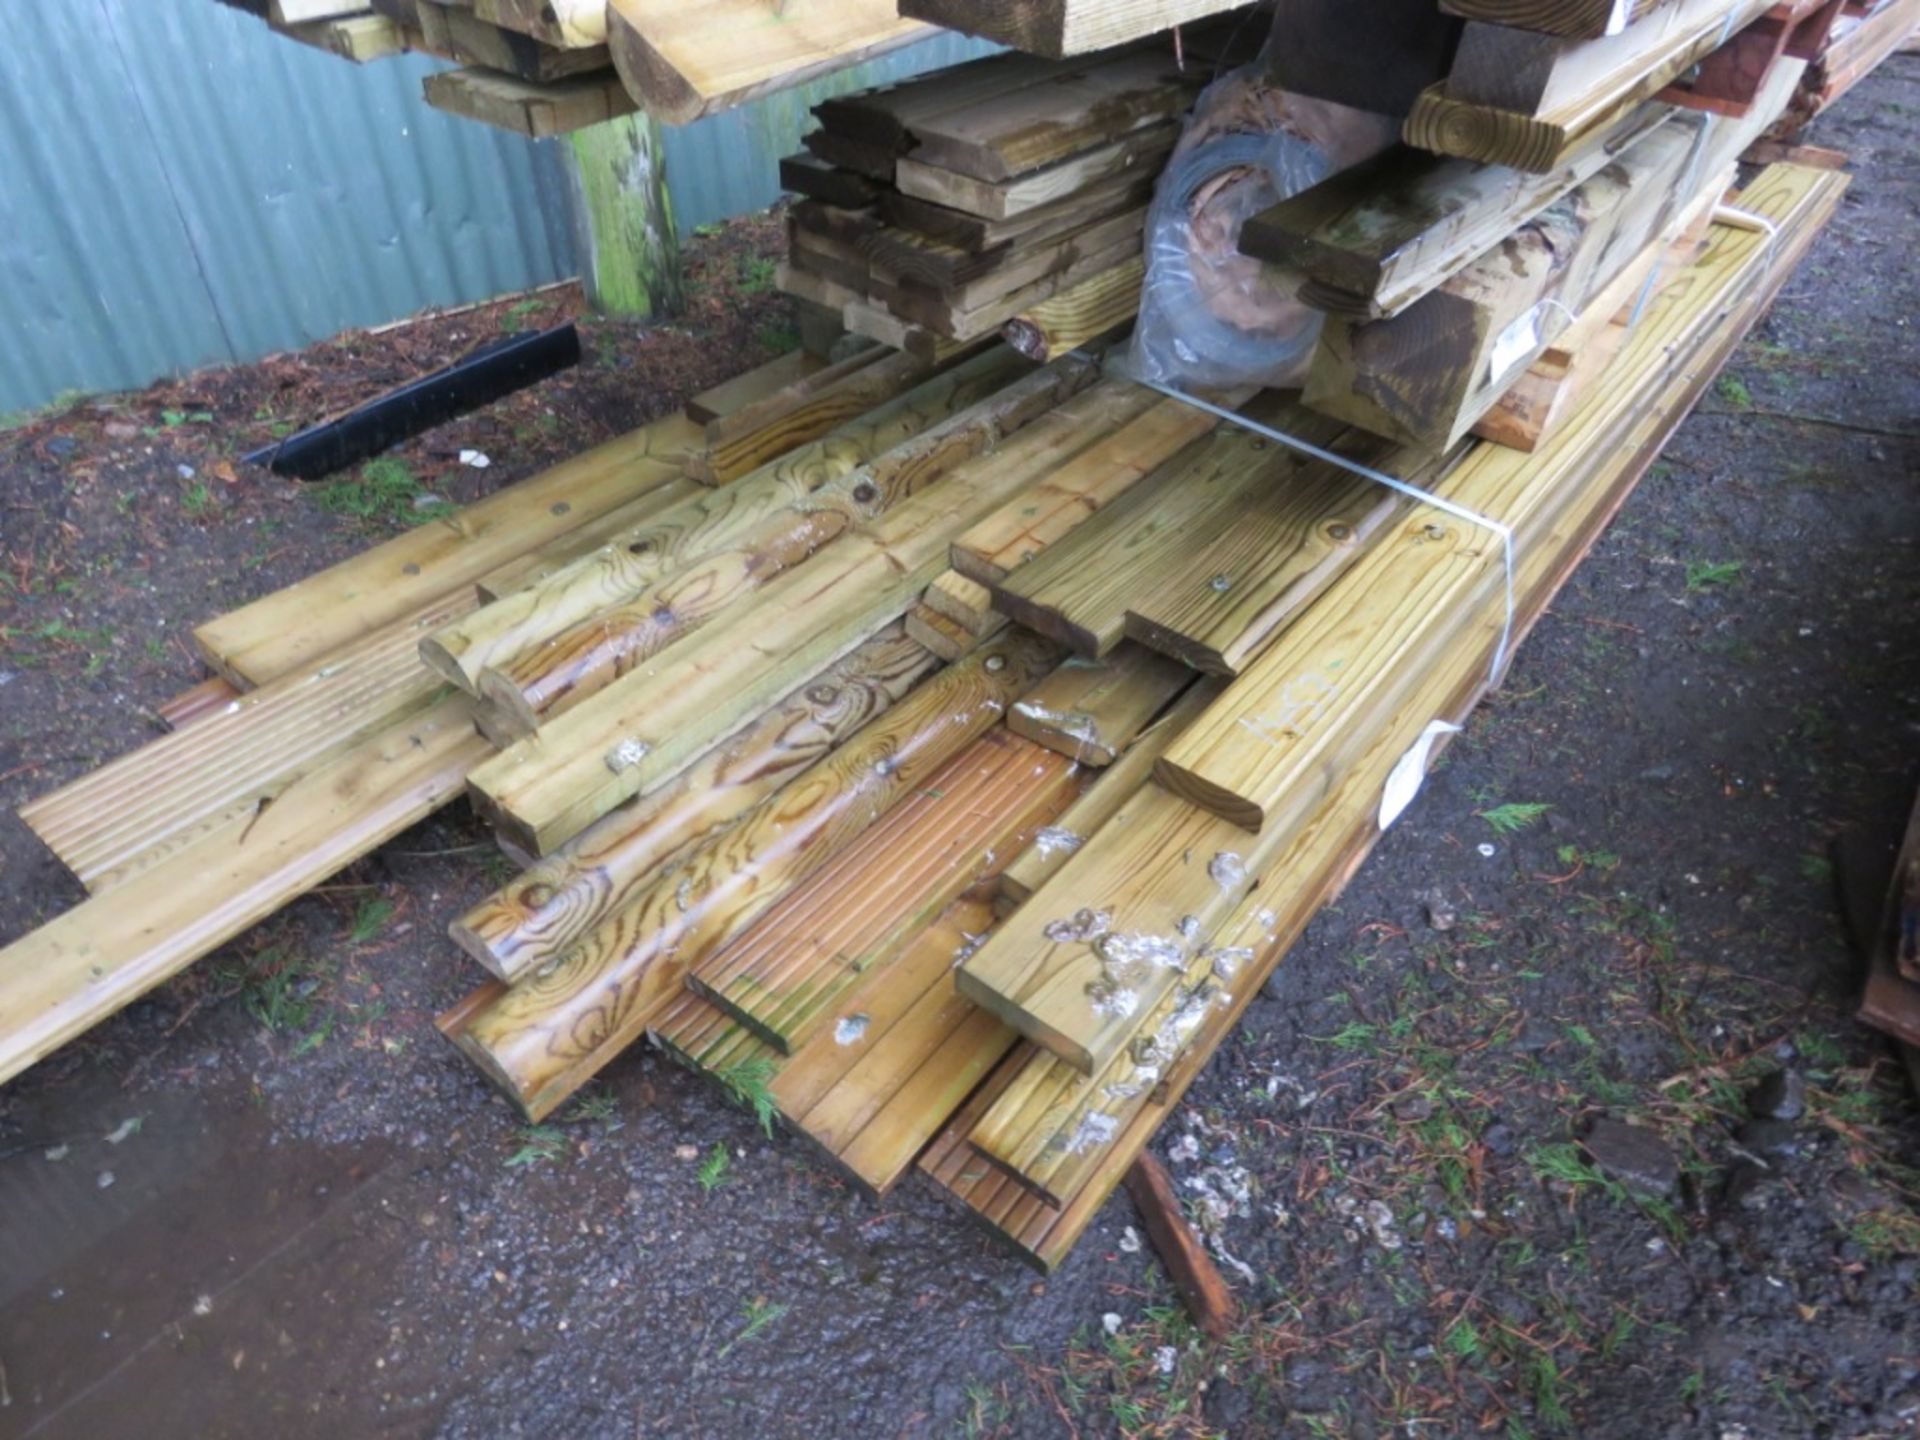 LARGE STACK OF ASSORTED TIMBER POSTS, ROLL OF WIRE, BOARDS ETC. 6FT -12FT APPROX. - Image 6 of 9